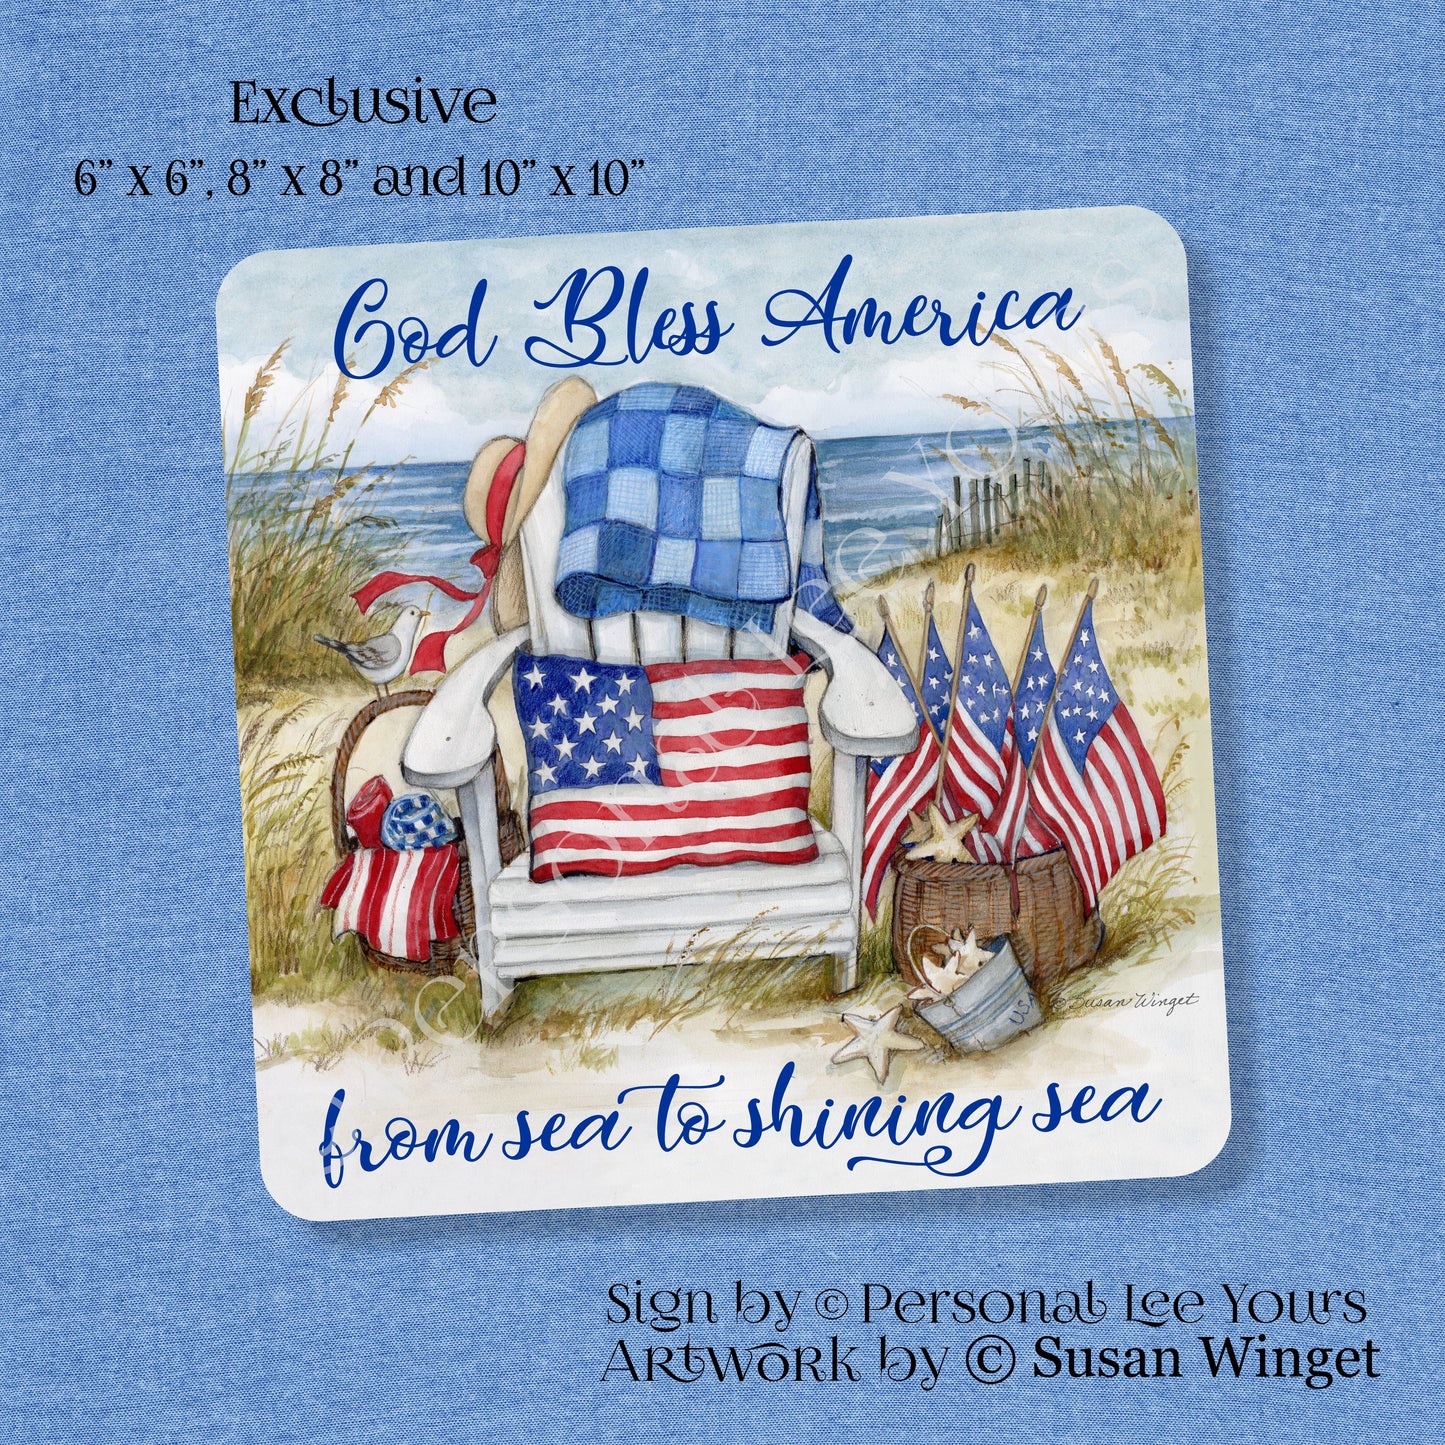 Susan Winget Exclusive Sign * God Bless America From Sea To Shining Sea * 3 Sizes * Lightweight Metal